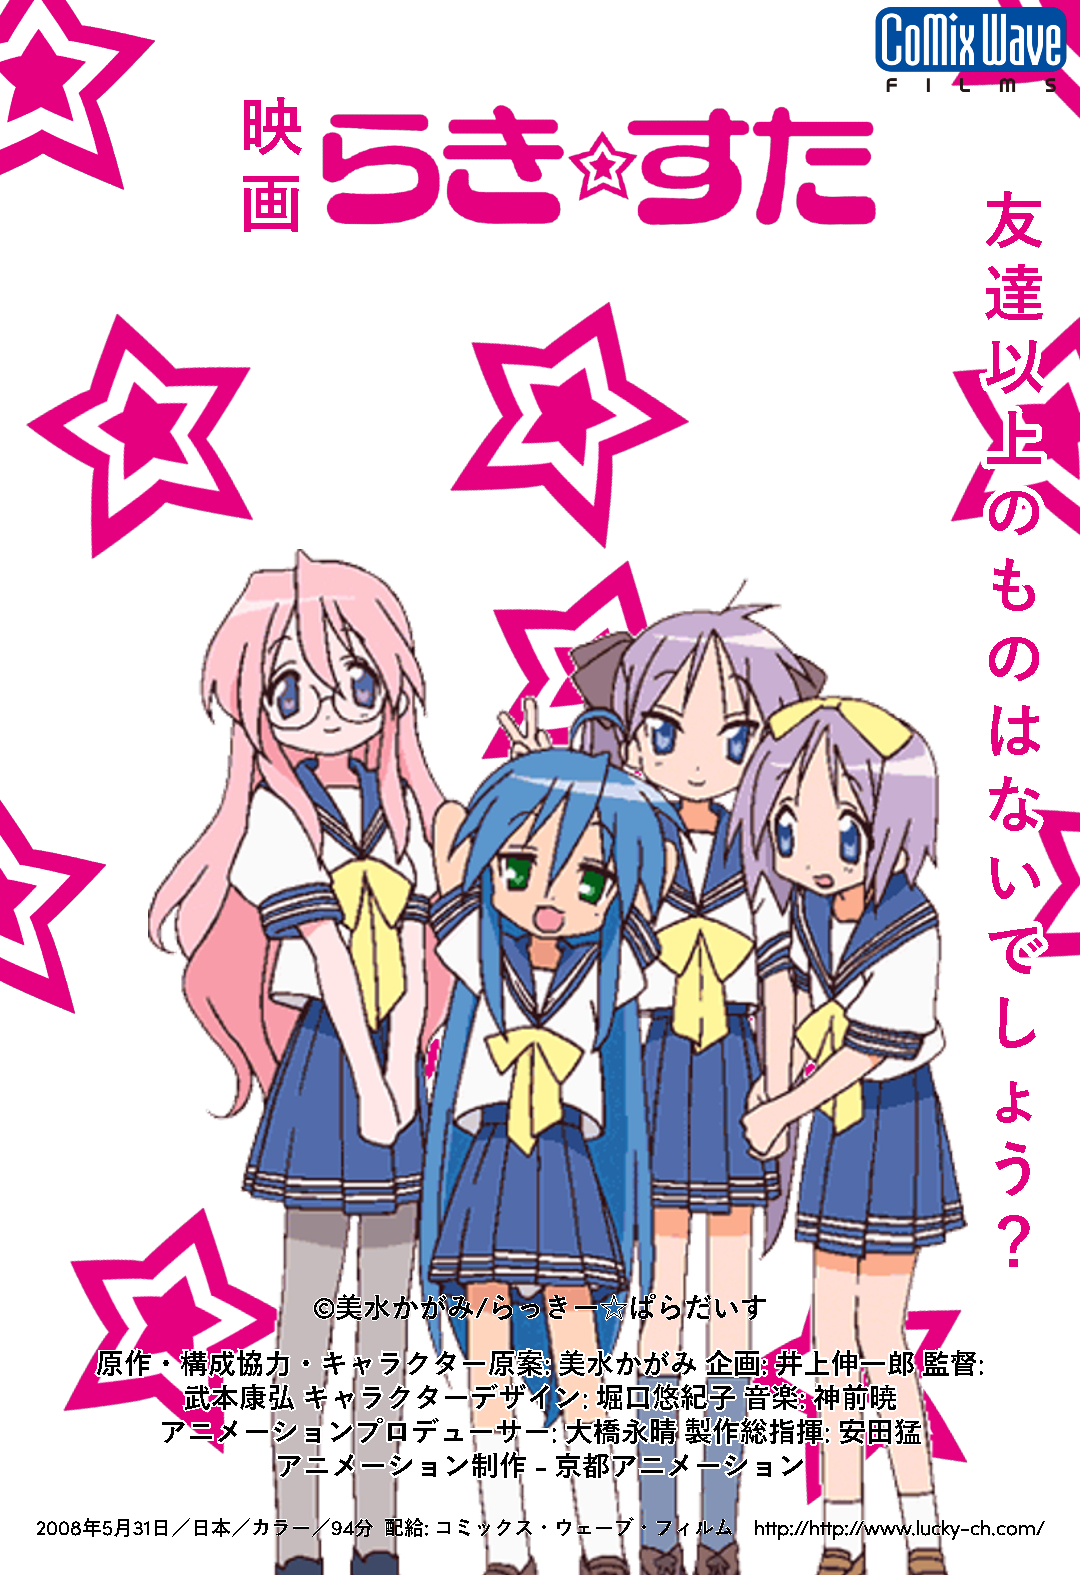 39 August 31 2015  Lucky Star Anime Logo  500x281 PNG Download  PNGkit